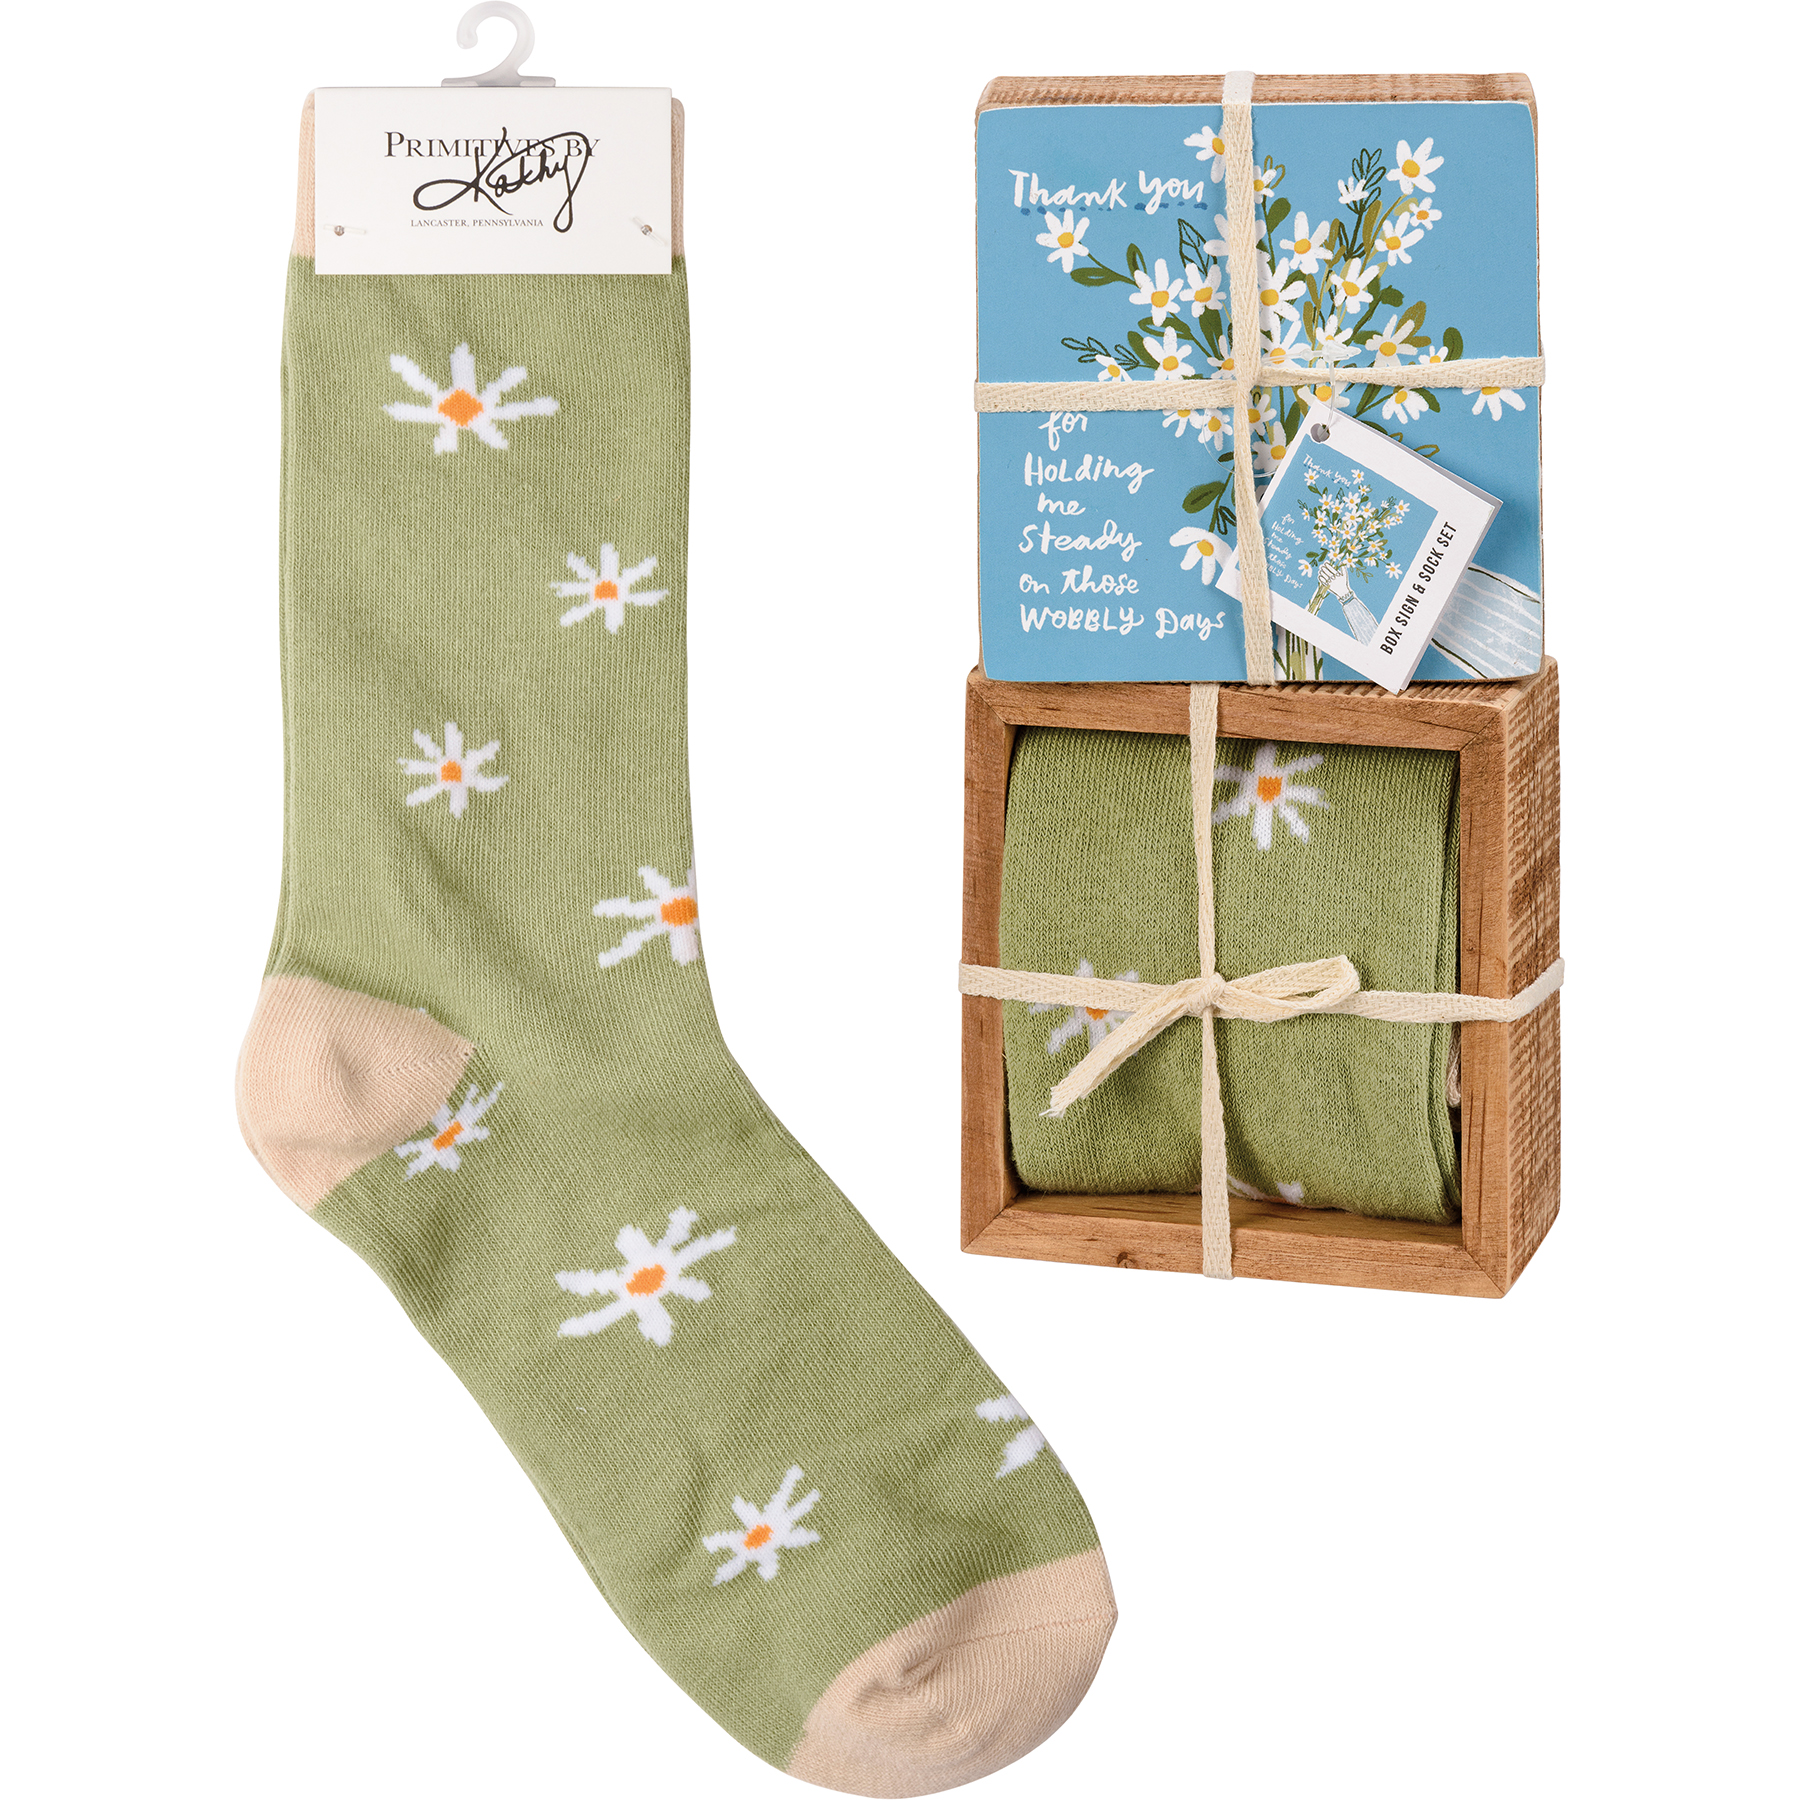 On Those Wobbly Days Box Sign And Sock Set | Primitives By Kathy